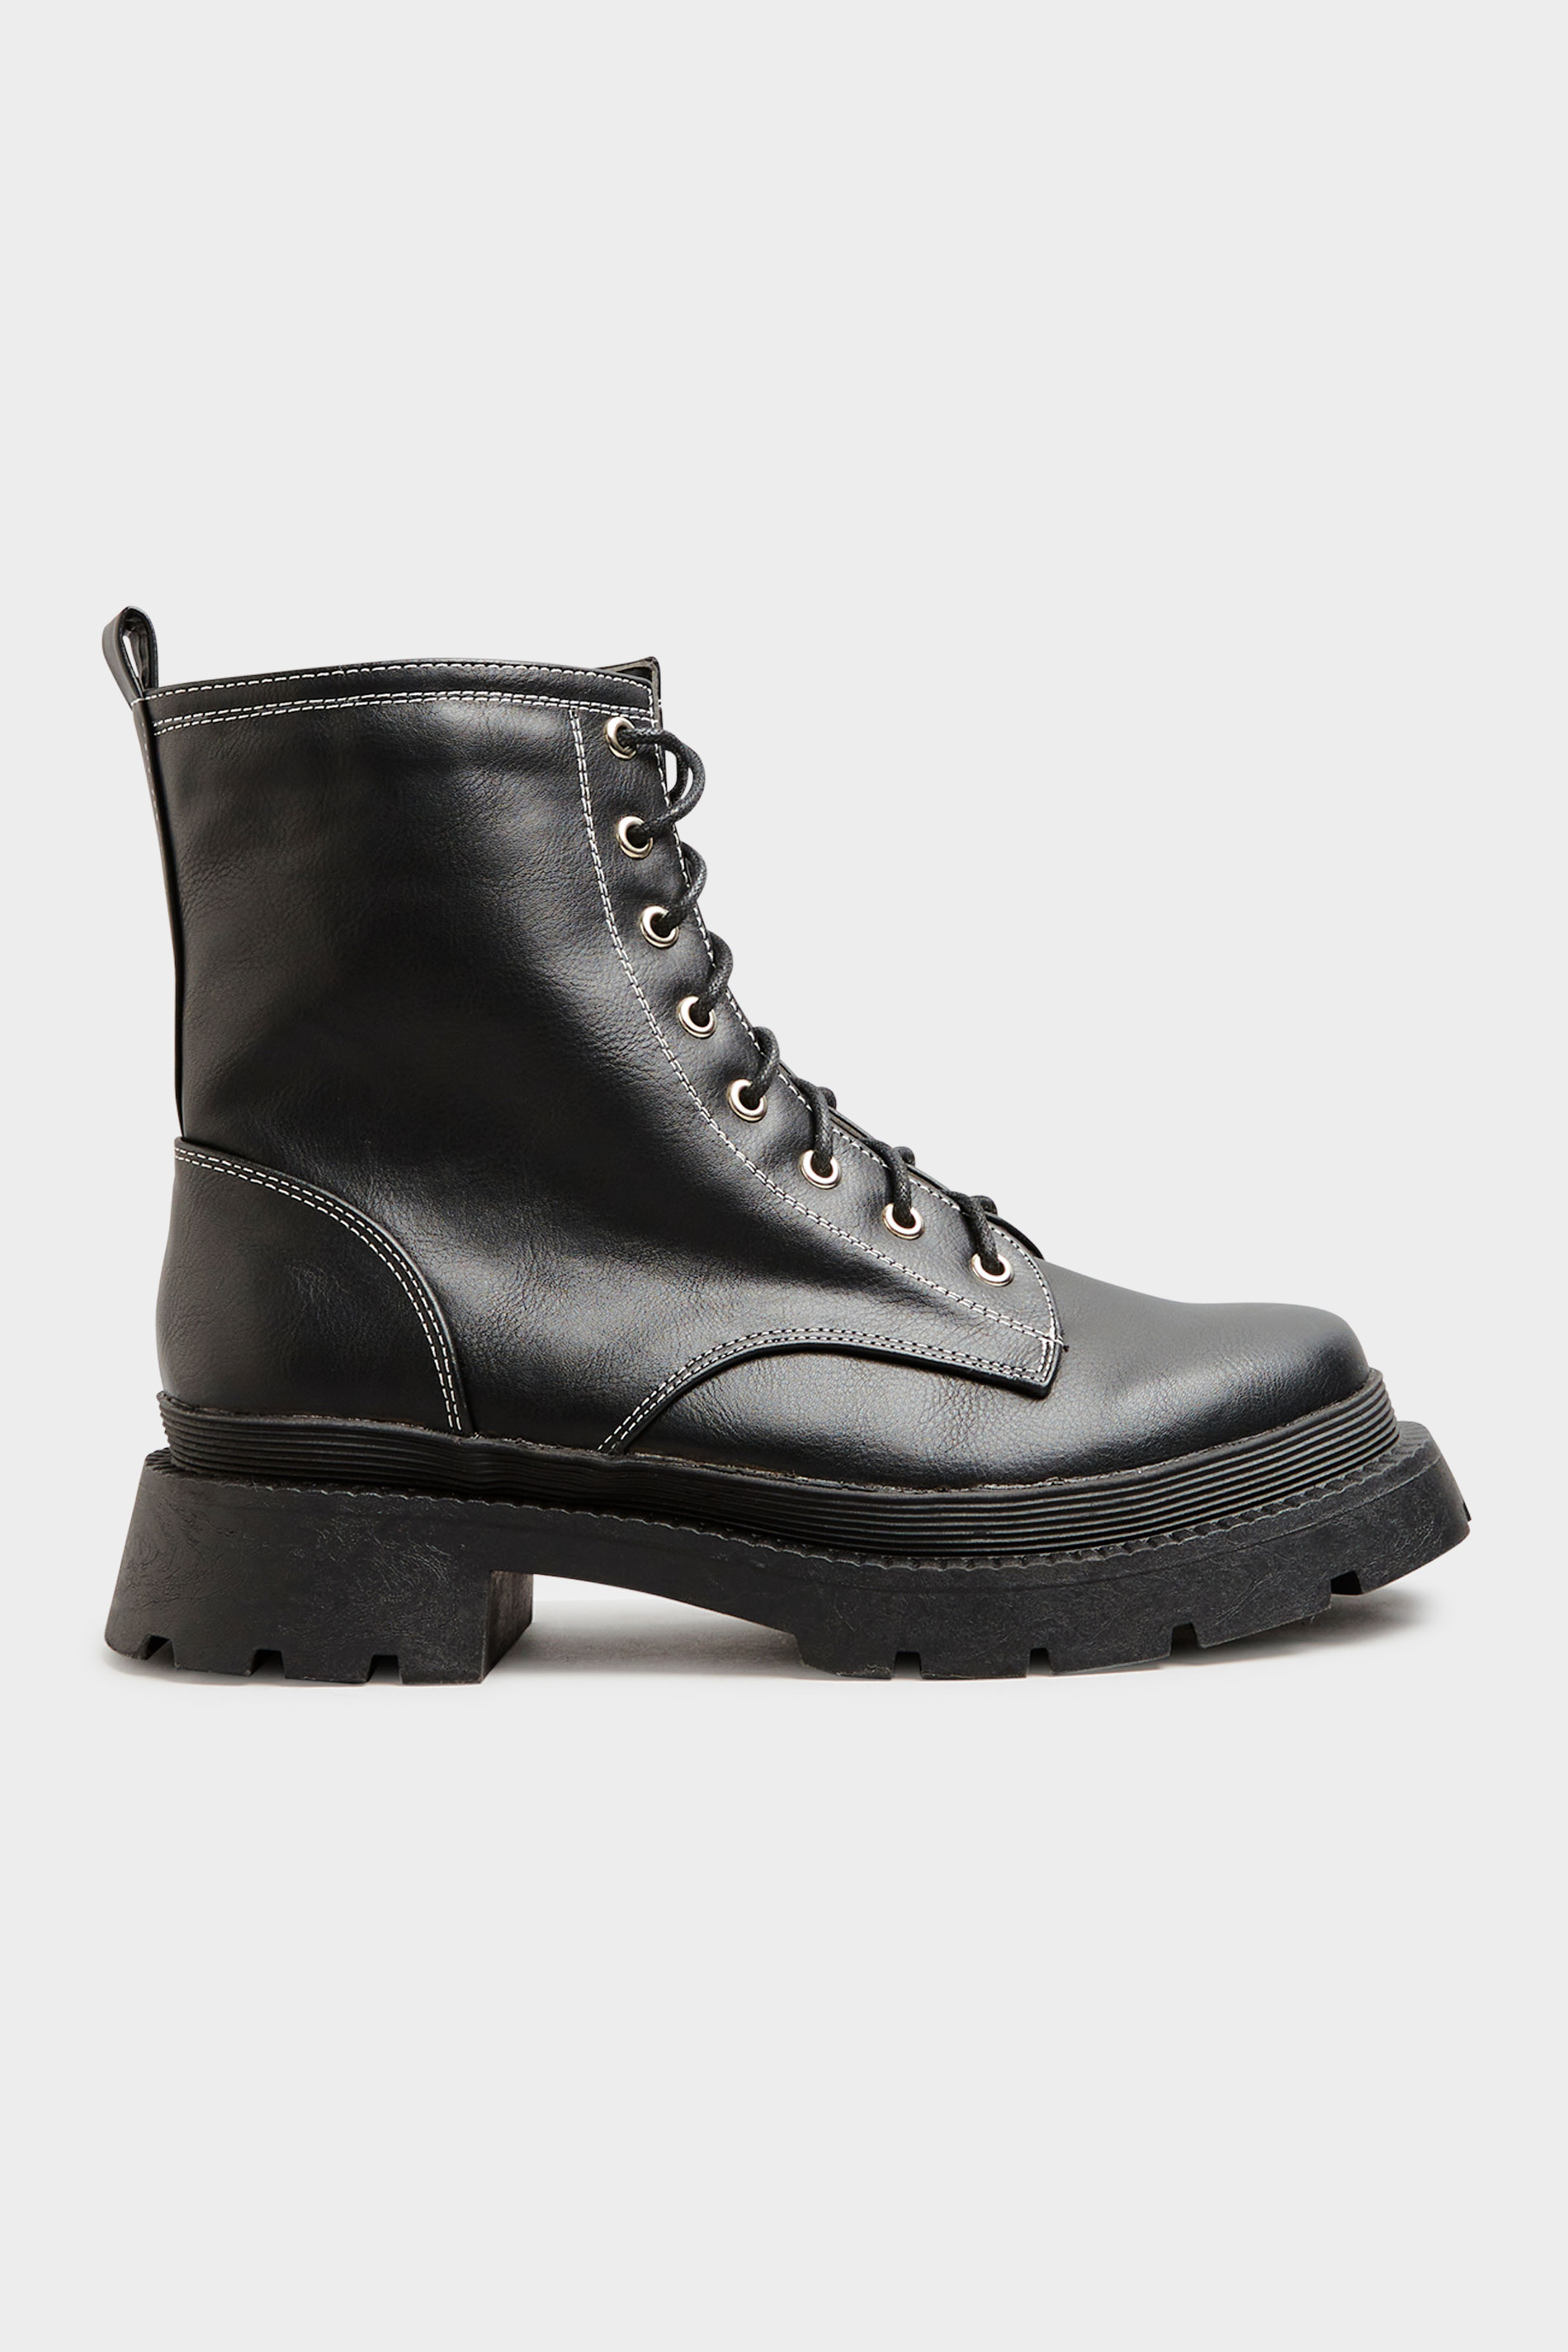 LIMITED COLLECTION Black Contrast Stitch Chunky Boots In Extra Wide Fit ...